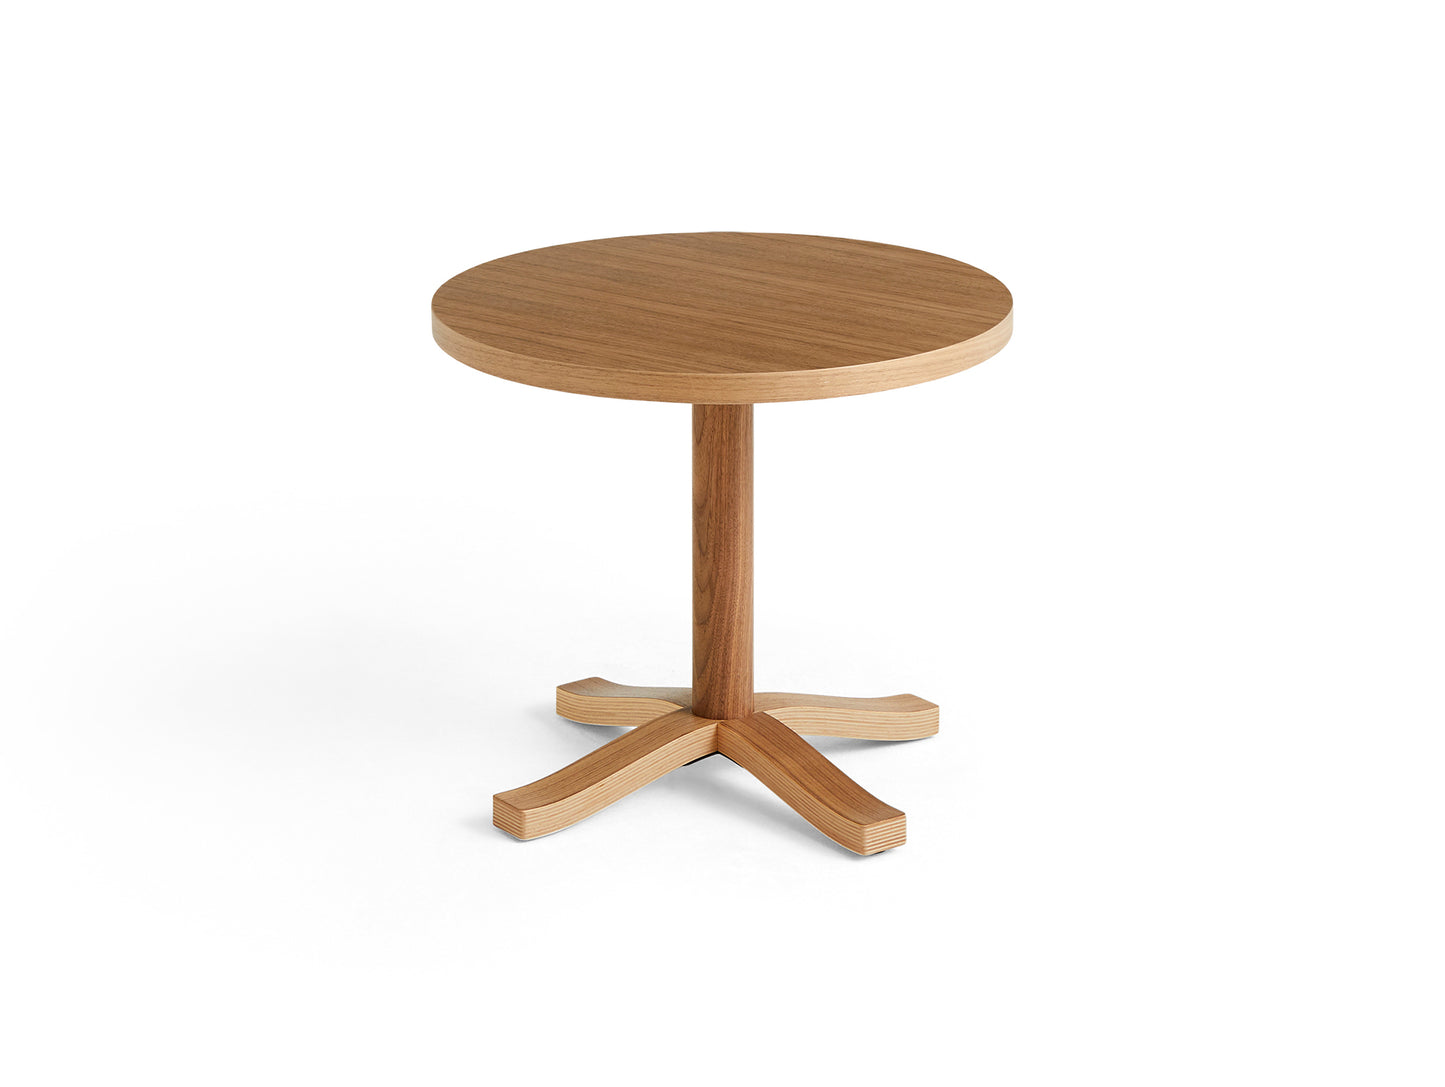 Pastis Table by HAY - Diameter 46 x Height 40 cm / Water-Based Lacquered Walnut